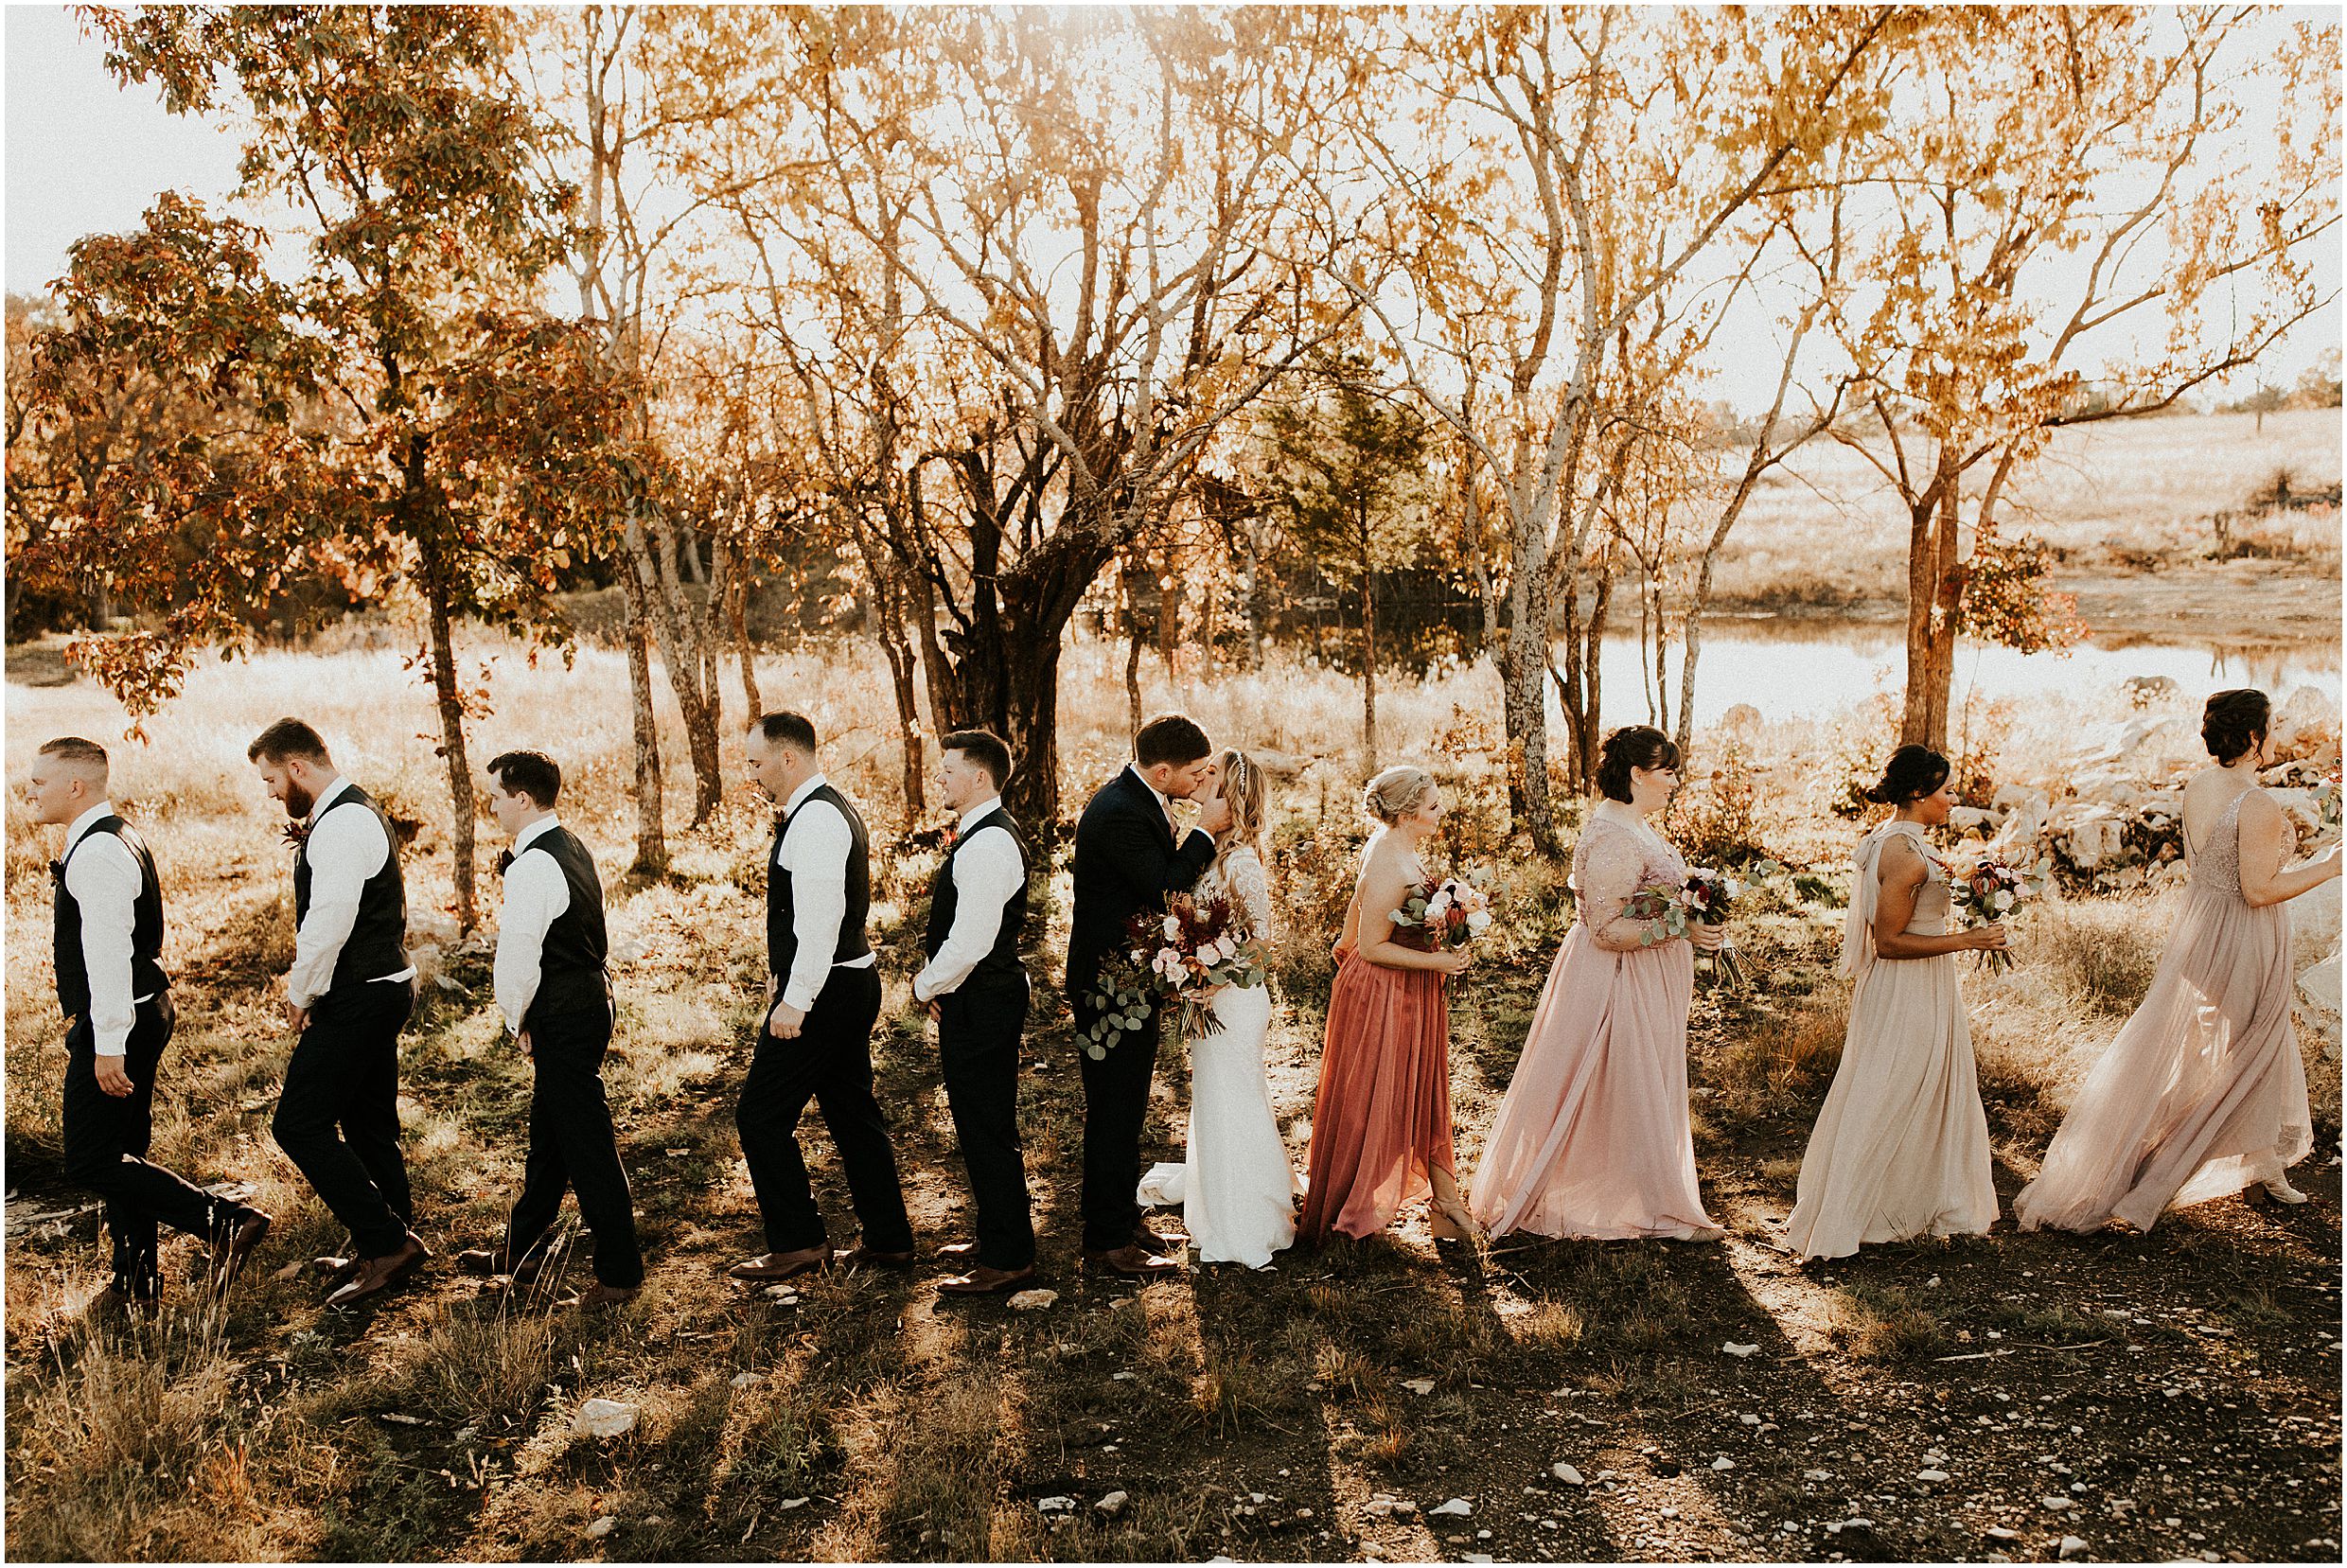 Wedding photography, wedding inspiration, outdoor wedding, boho wedding, bride style, wedding dress inspiration, wedding dress, long sleeve wedding dress, Kansas City wedding photographer, fall wedding, lace bridal gown, Kansas City wedding, reception pictures, groom style, DIY wedding, fall bridesmaid dresses, intimate wedding, small wedding, sunset photos, bridal party photos, bride and groom photos, outdoor wedding photos, Burgundy wedding colors, bridal party photos